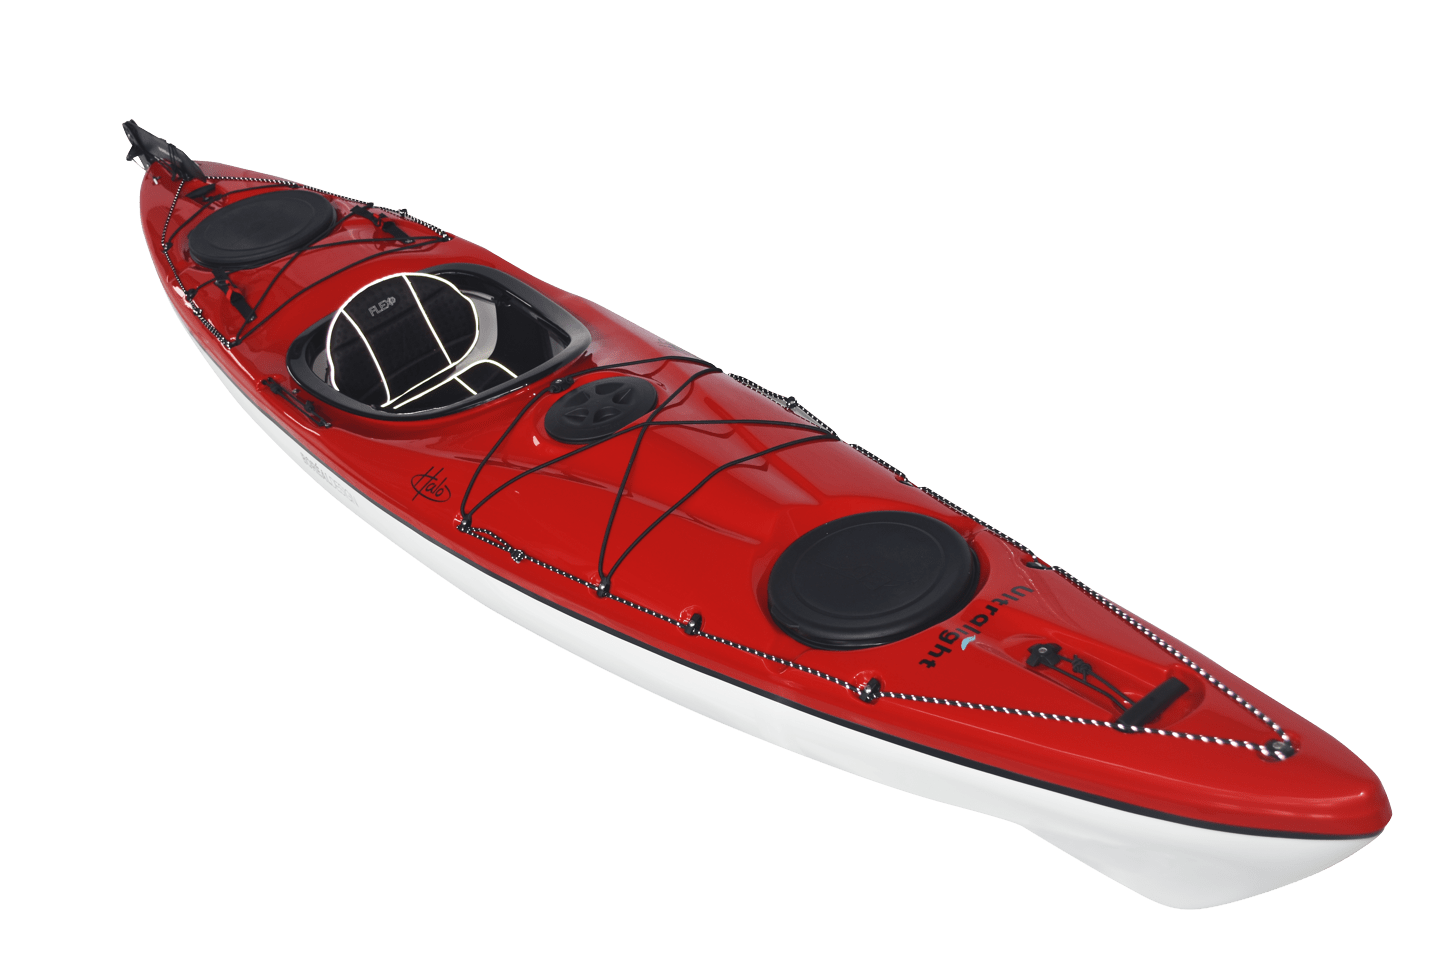 Demo Boreal Design Halo 130 TX  - ULTRALIGHT With Rudder (on sale )